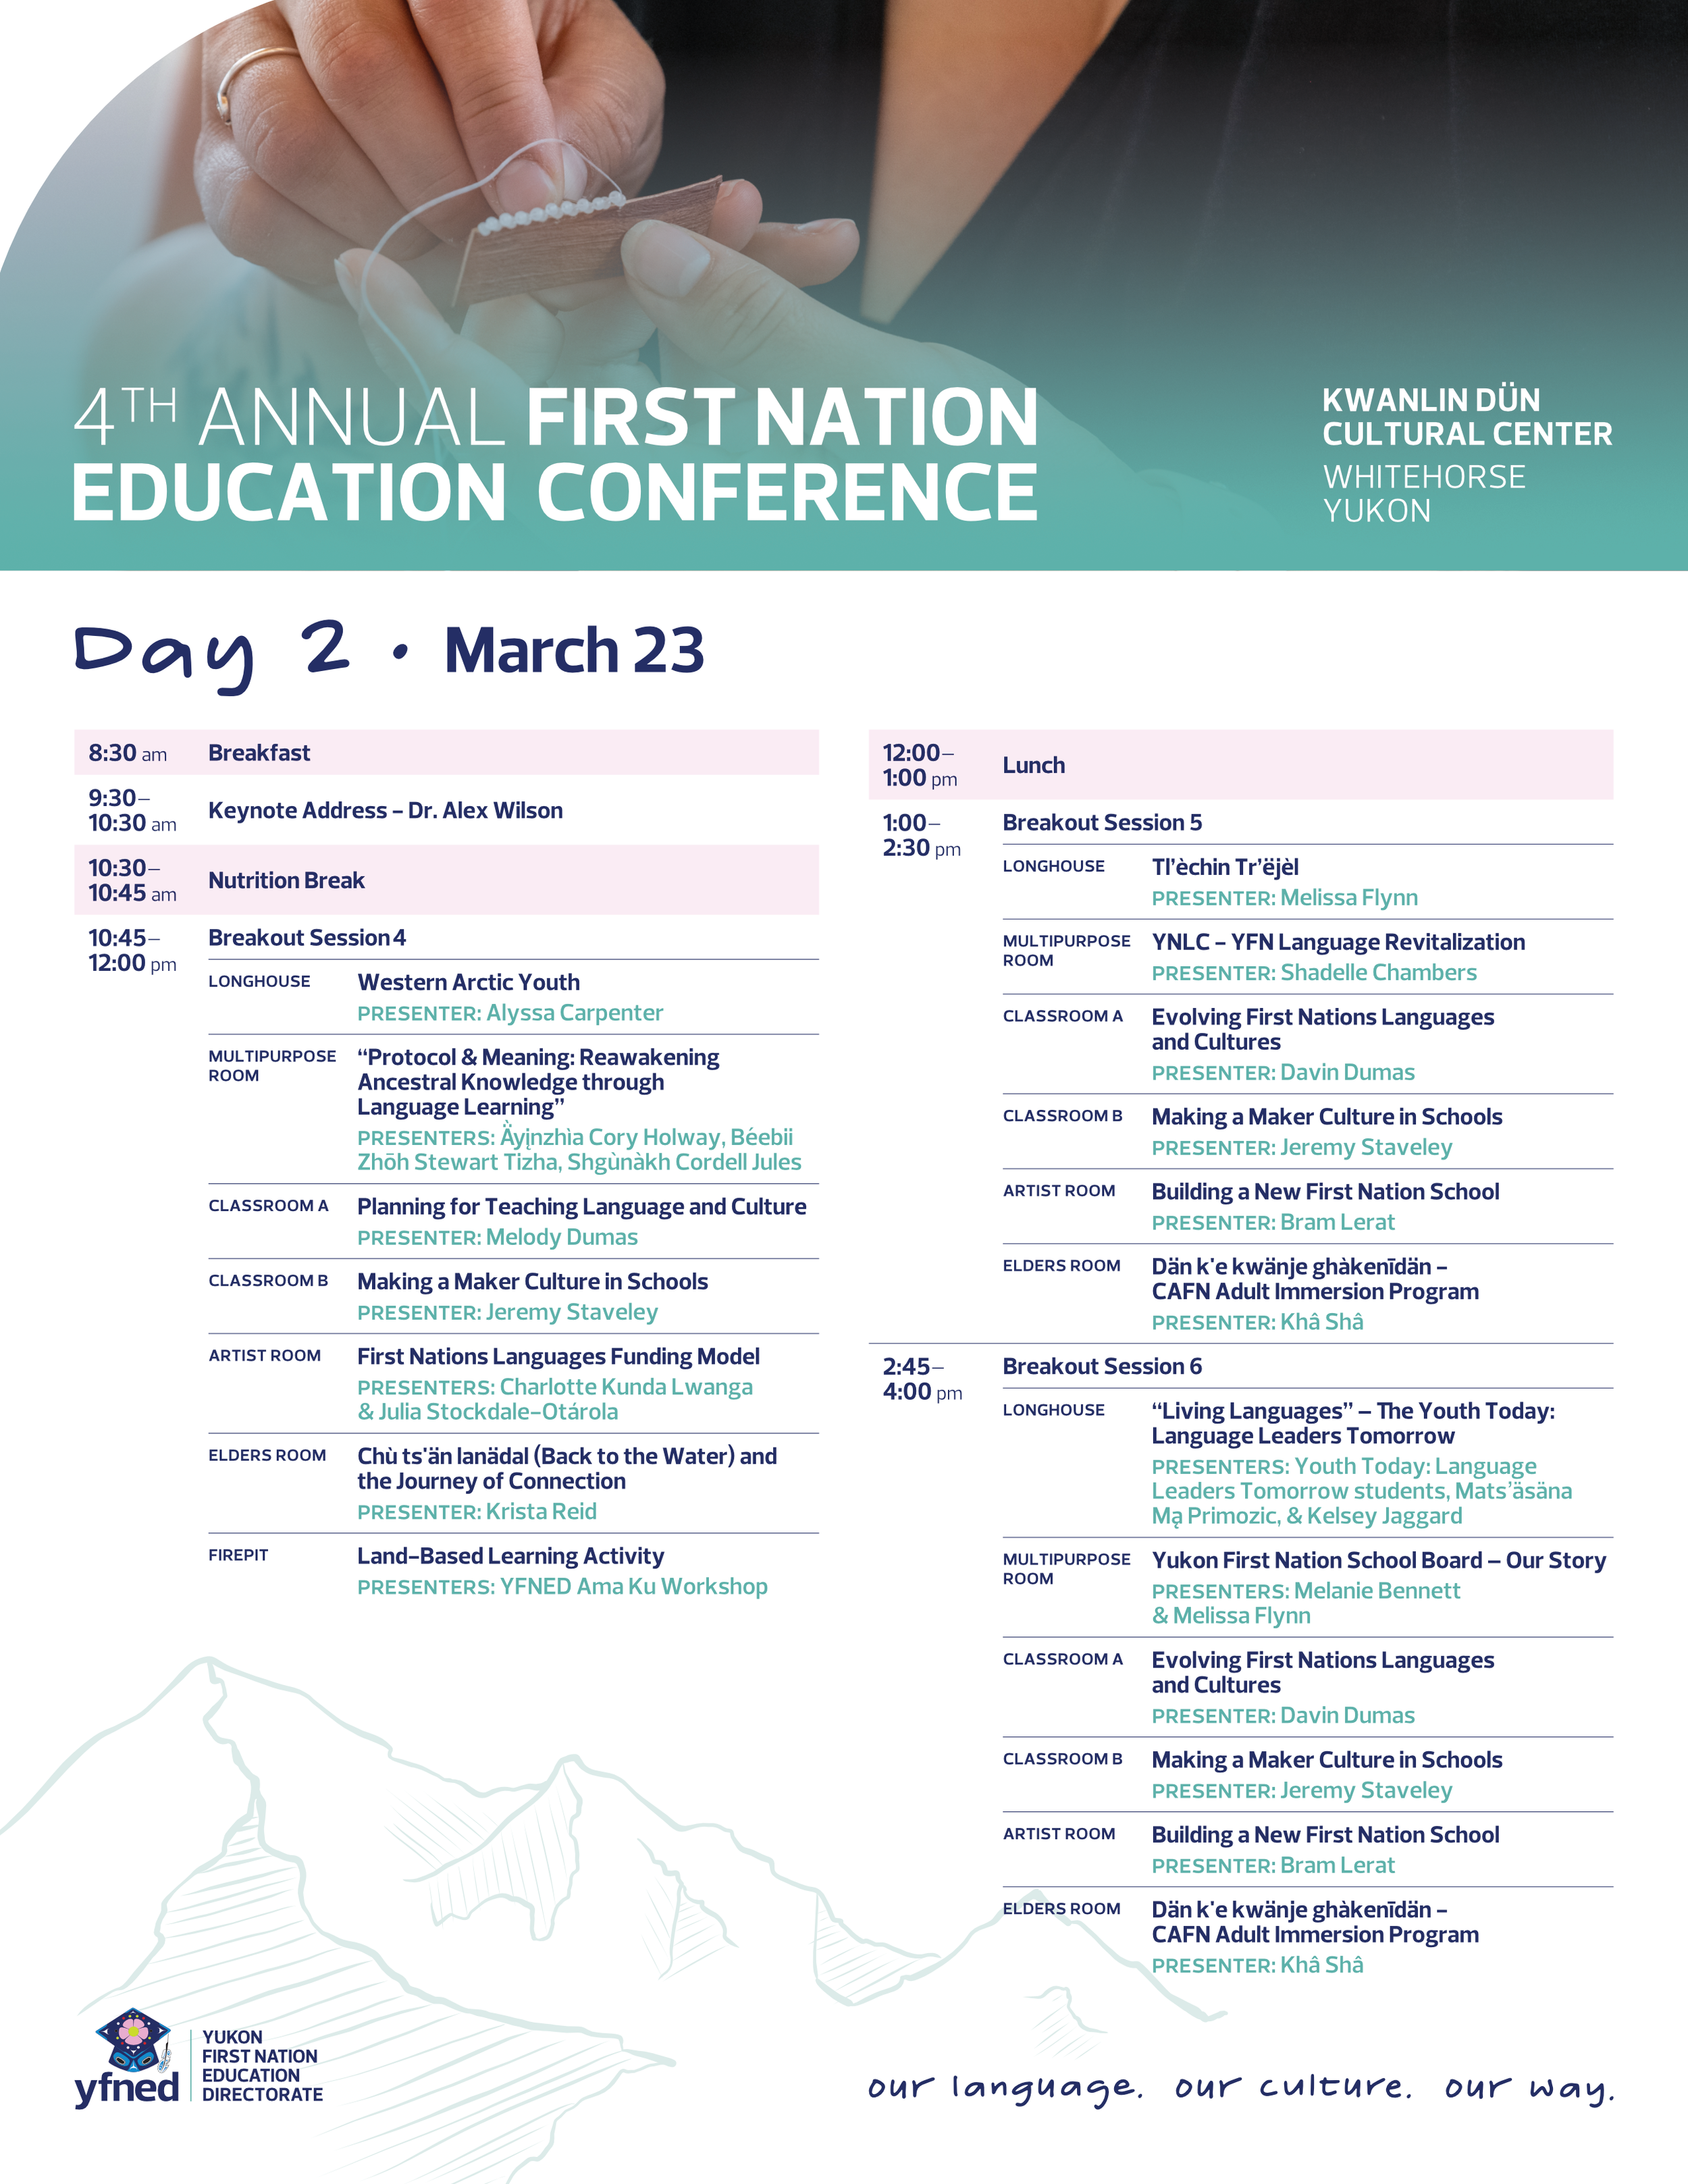 YFNED - 4th Annual First Nation Education Conference Program (2022Feb28)_2.png